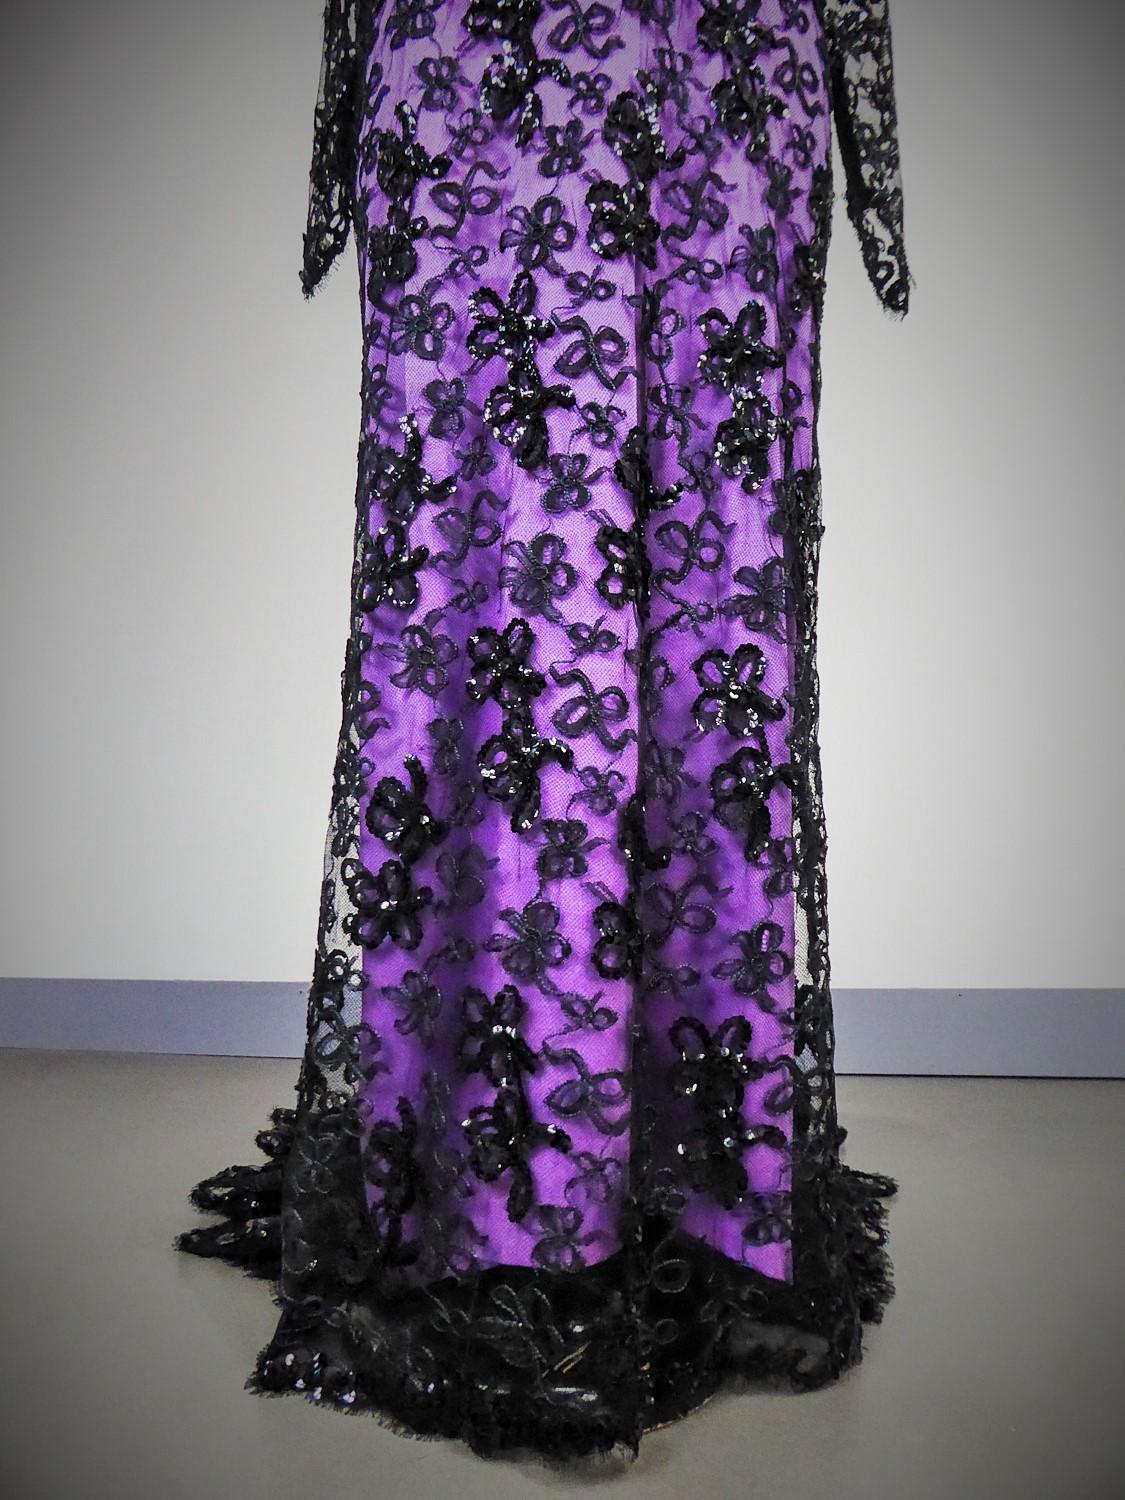 Black Yves Saint Laurent Couture Evening Gown Lace and Satin n. 59501 Collection 1985